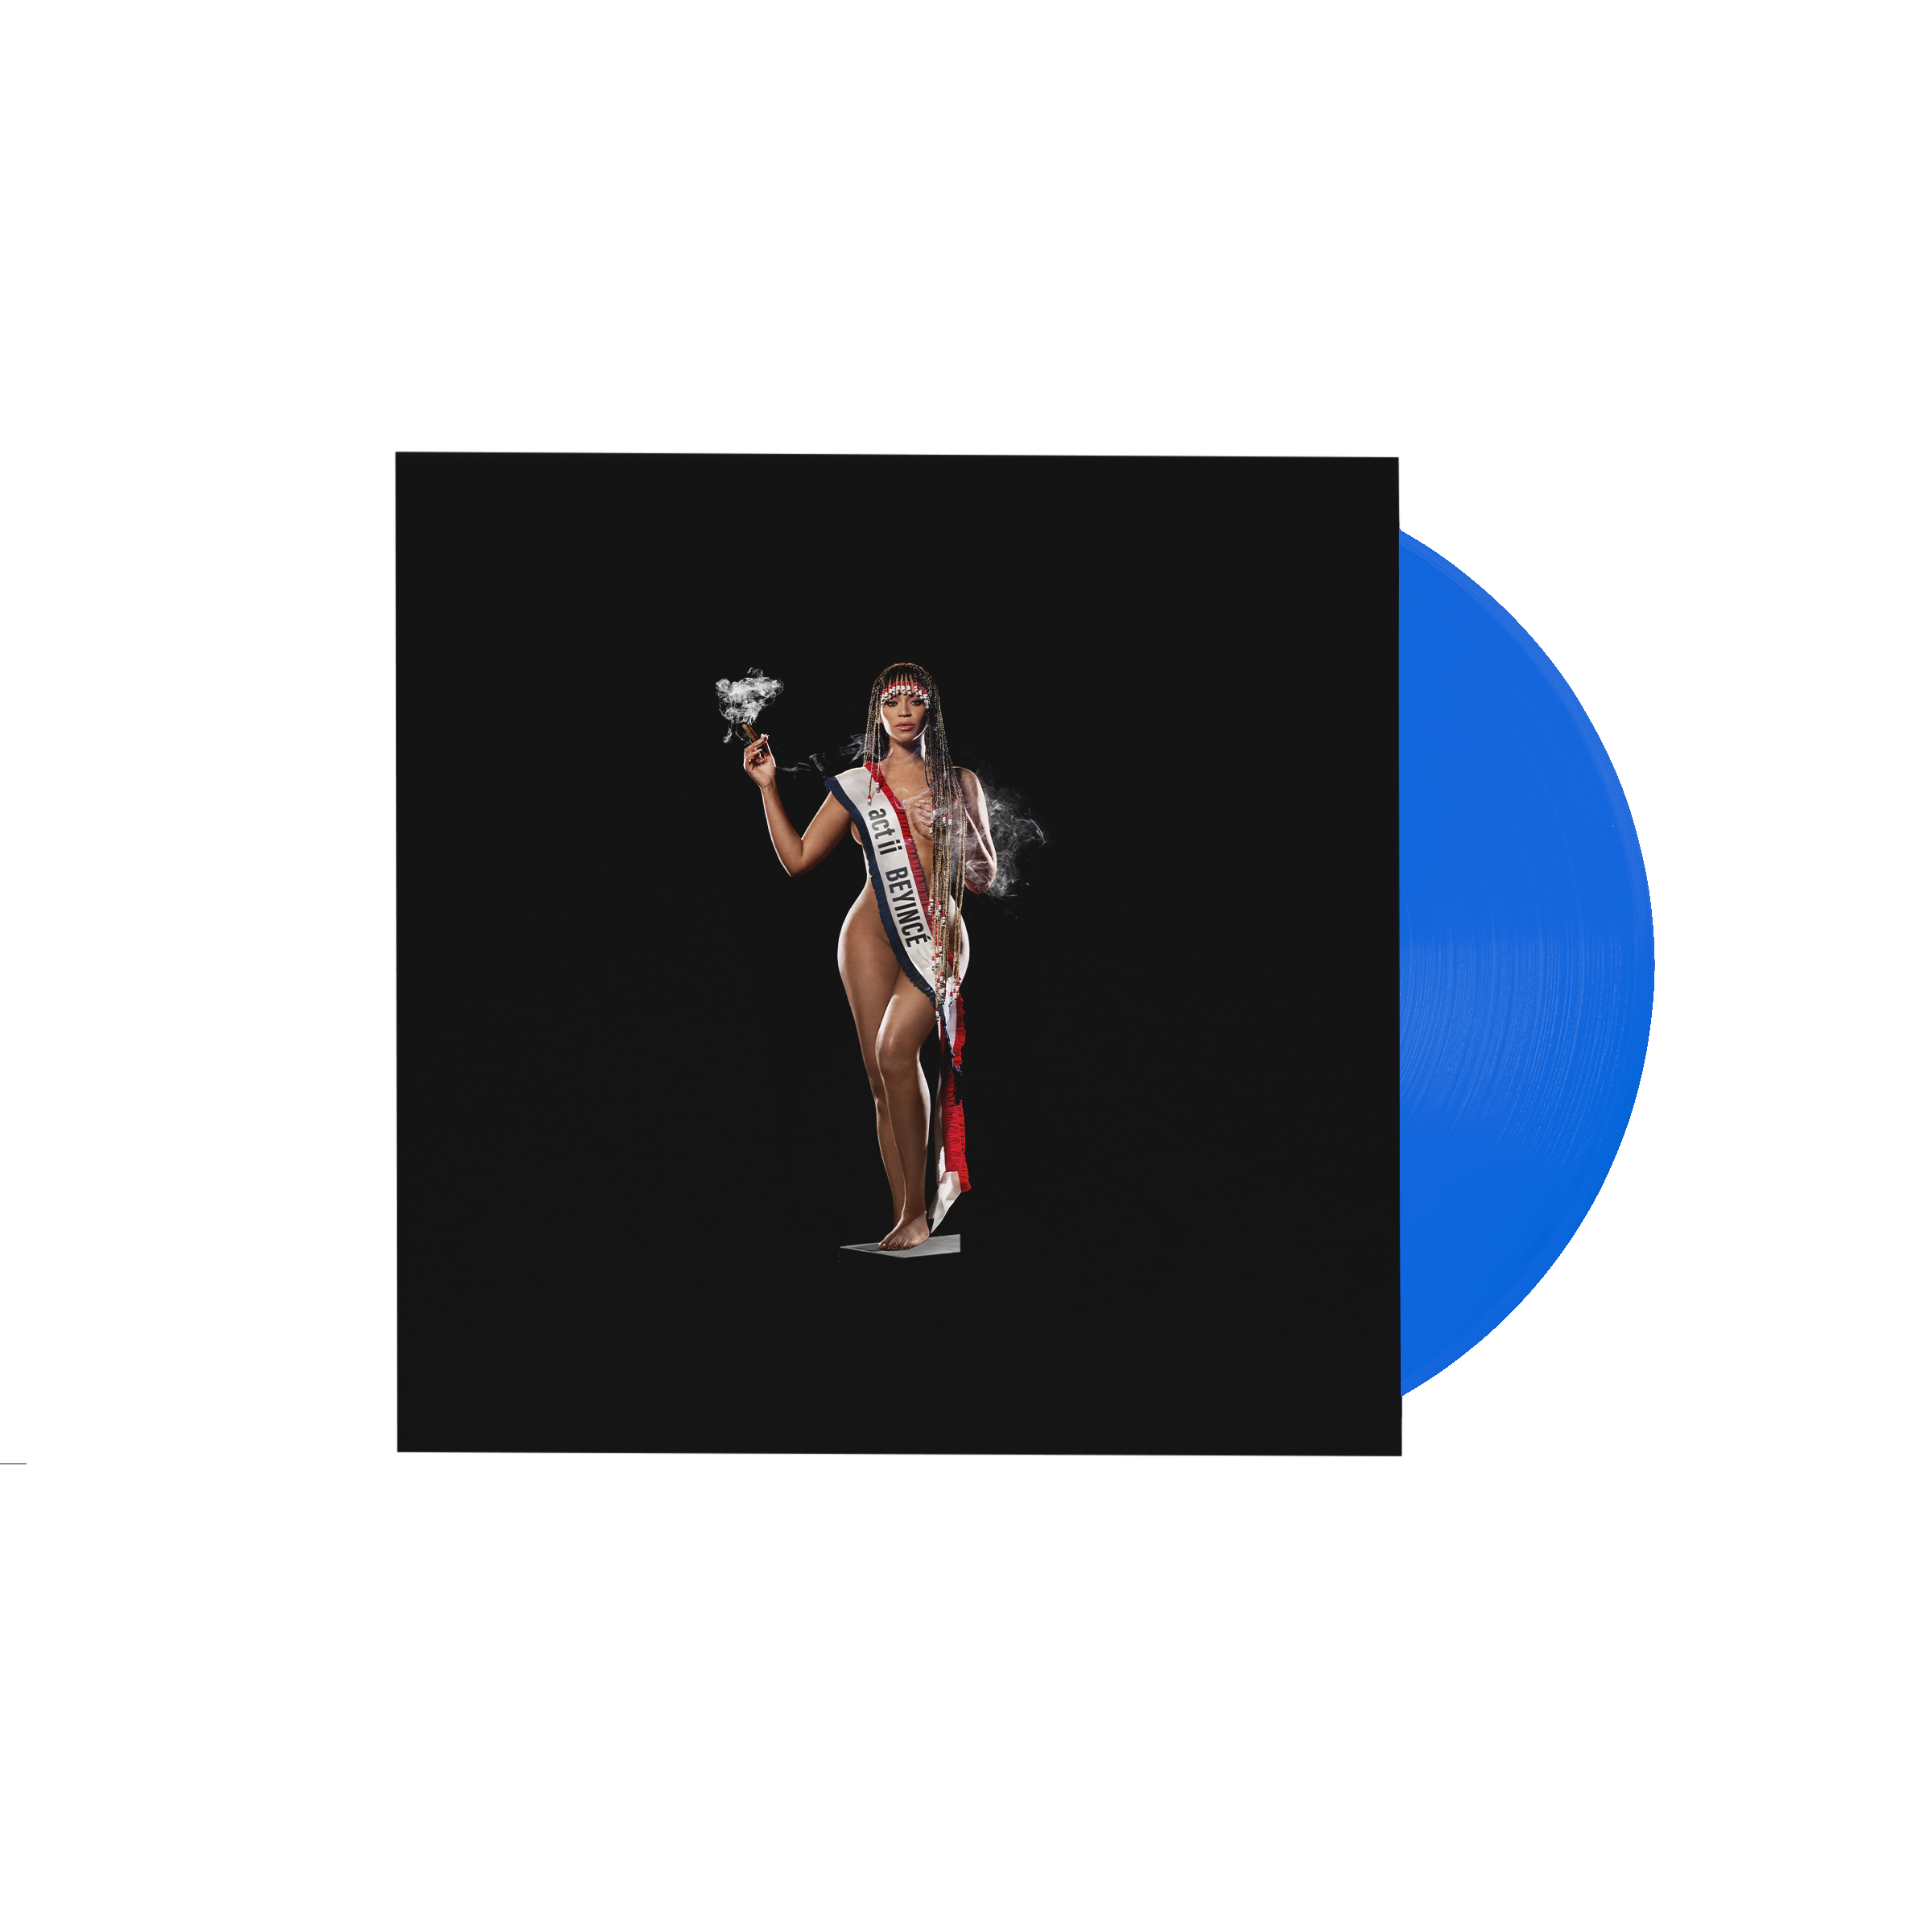 COWBOY CARTER LIMITED EDITION EXCLUSIVE COVER VINYL (BLUE)